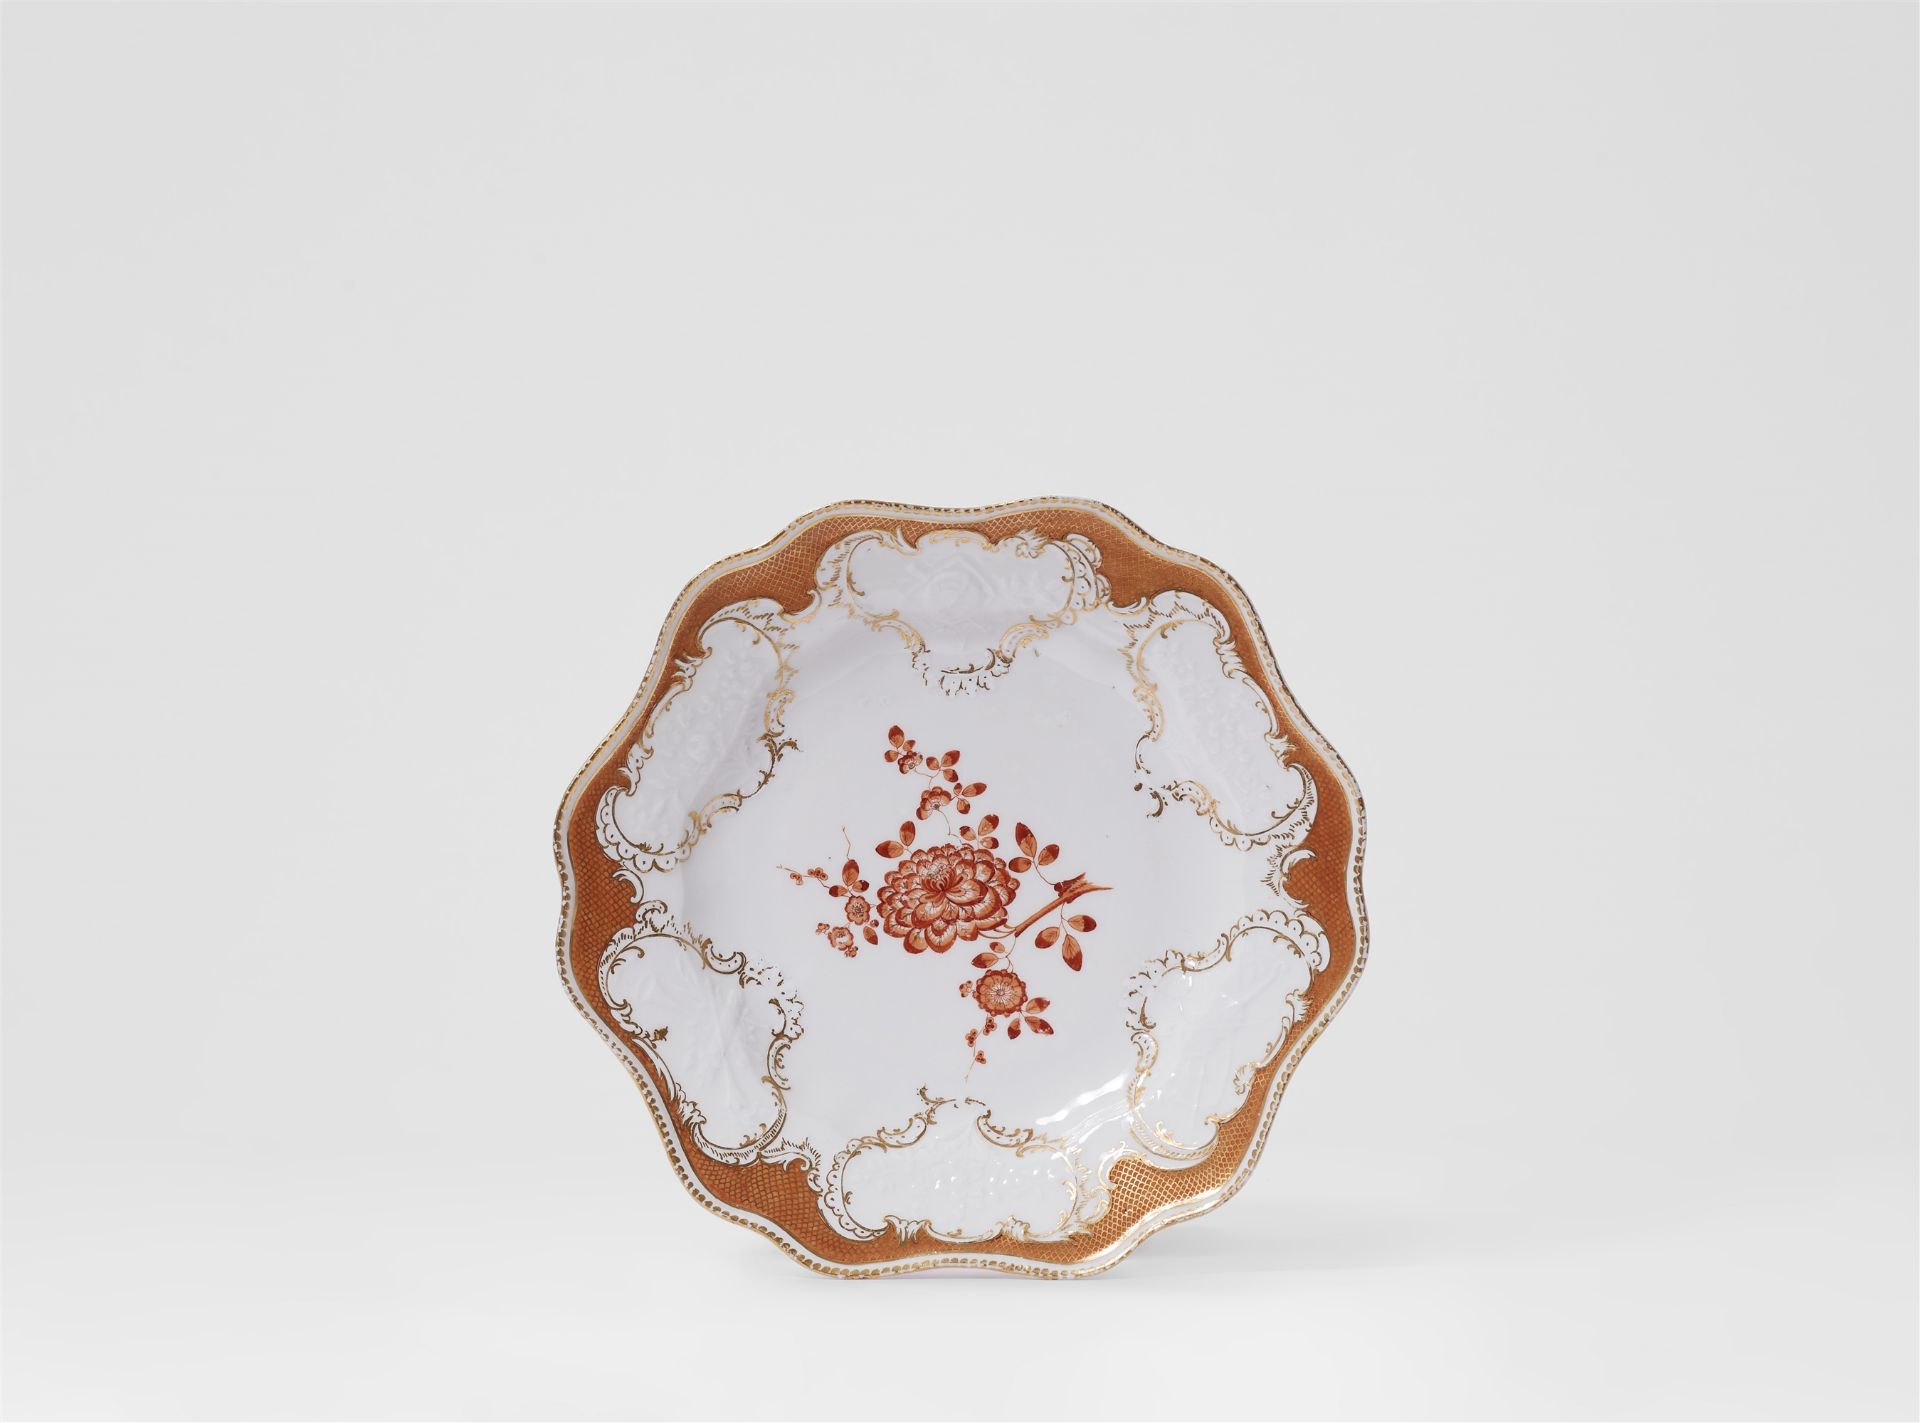 A Meissen porcelain dinner plate from a service with iron red mosaic borders - Image 3 of 3